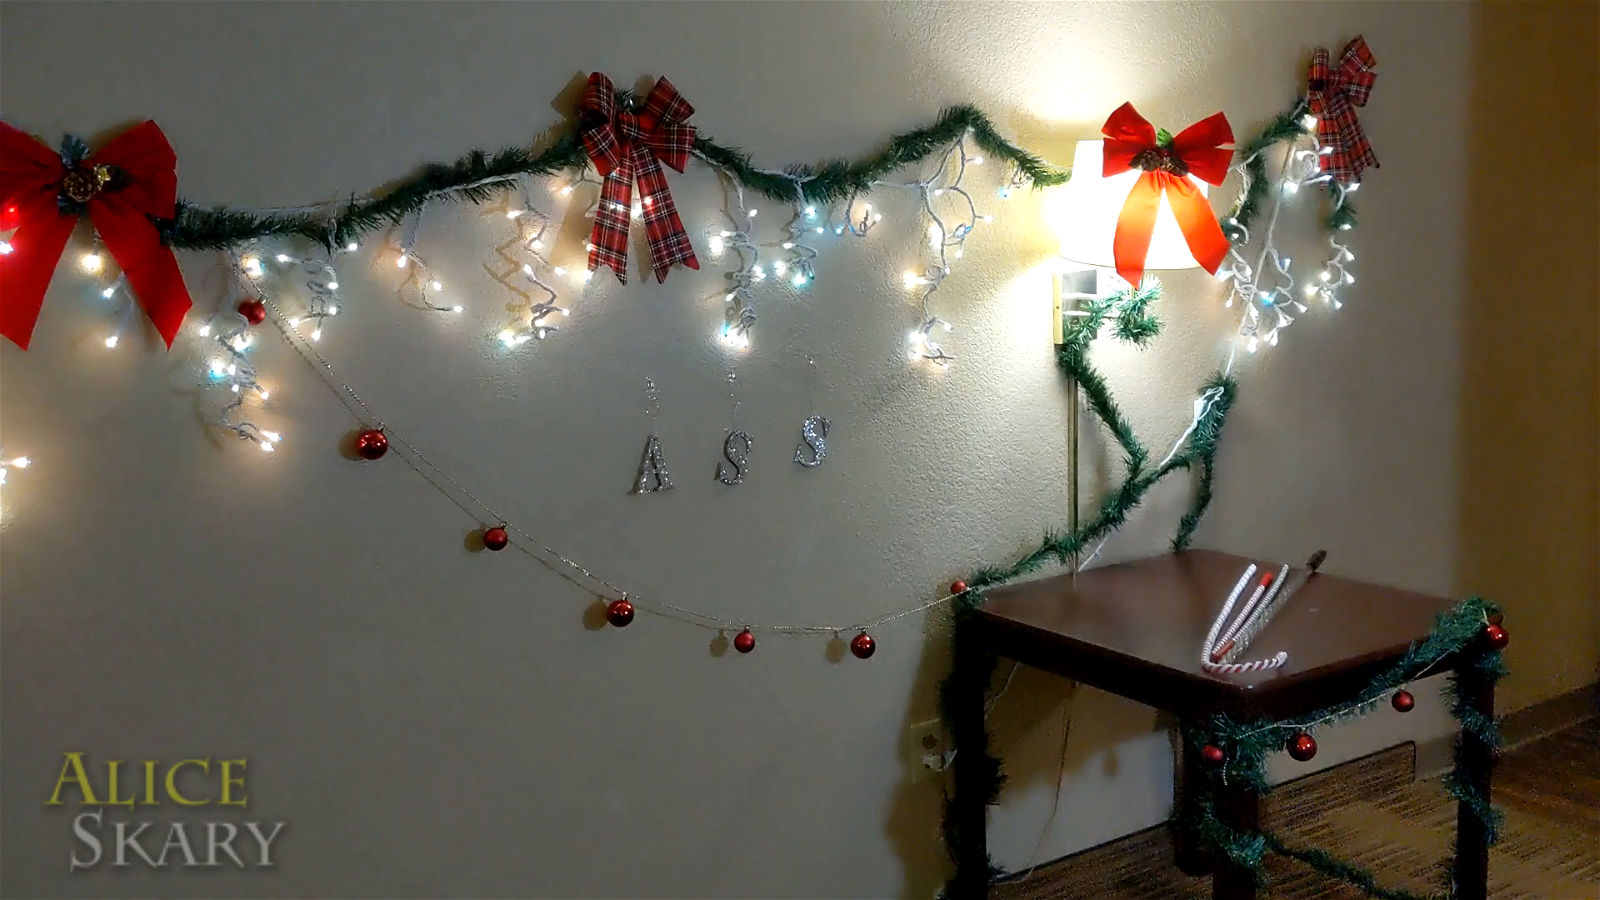 Video by Alice Skary with the username @aliceskary, who is a star user,  December 8, 2019 at 6:24 PM. The post is about the topic Funny Kink and the text says 'Hi! First time posting in this topic. I made a mrs santa RP video for the holidays, is the trailer funny at all? I tried to make it light hearted and silly. Let me know what you think plz?'